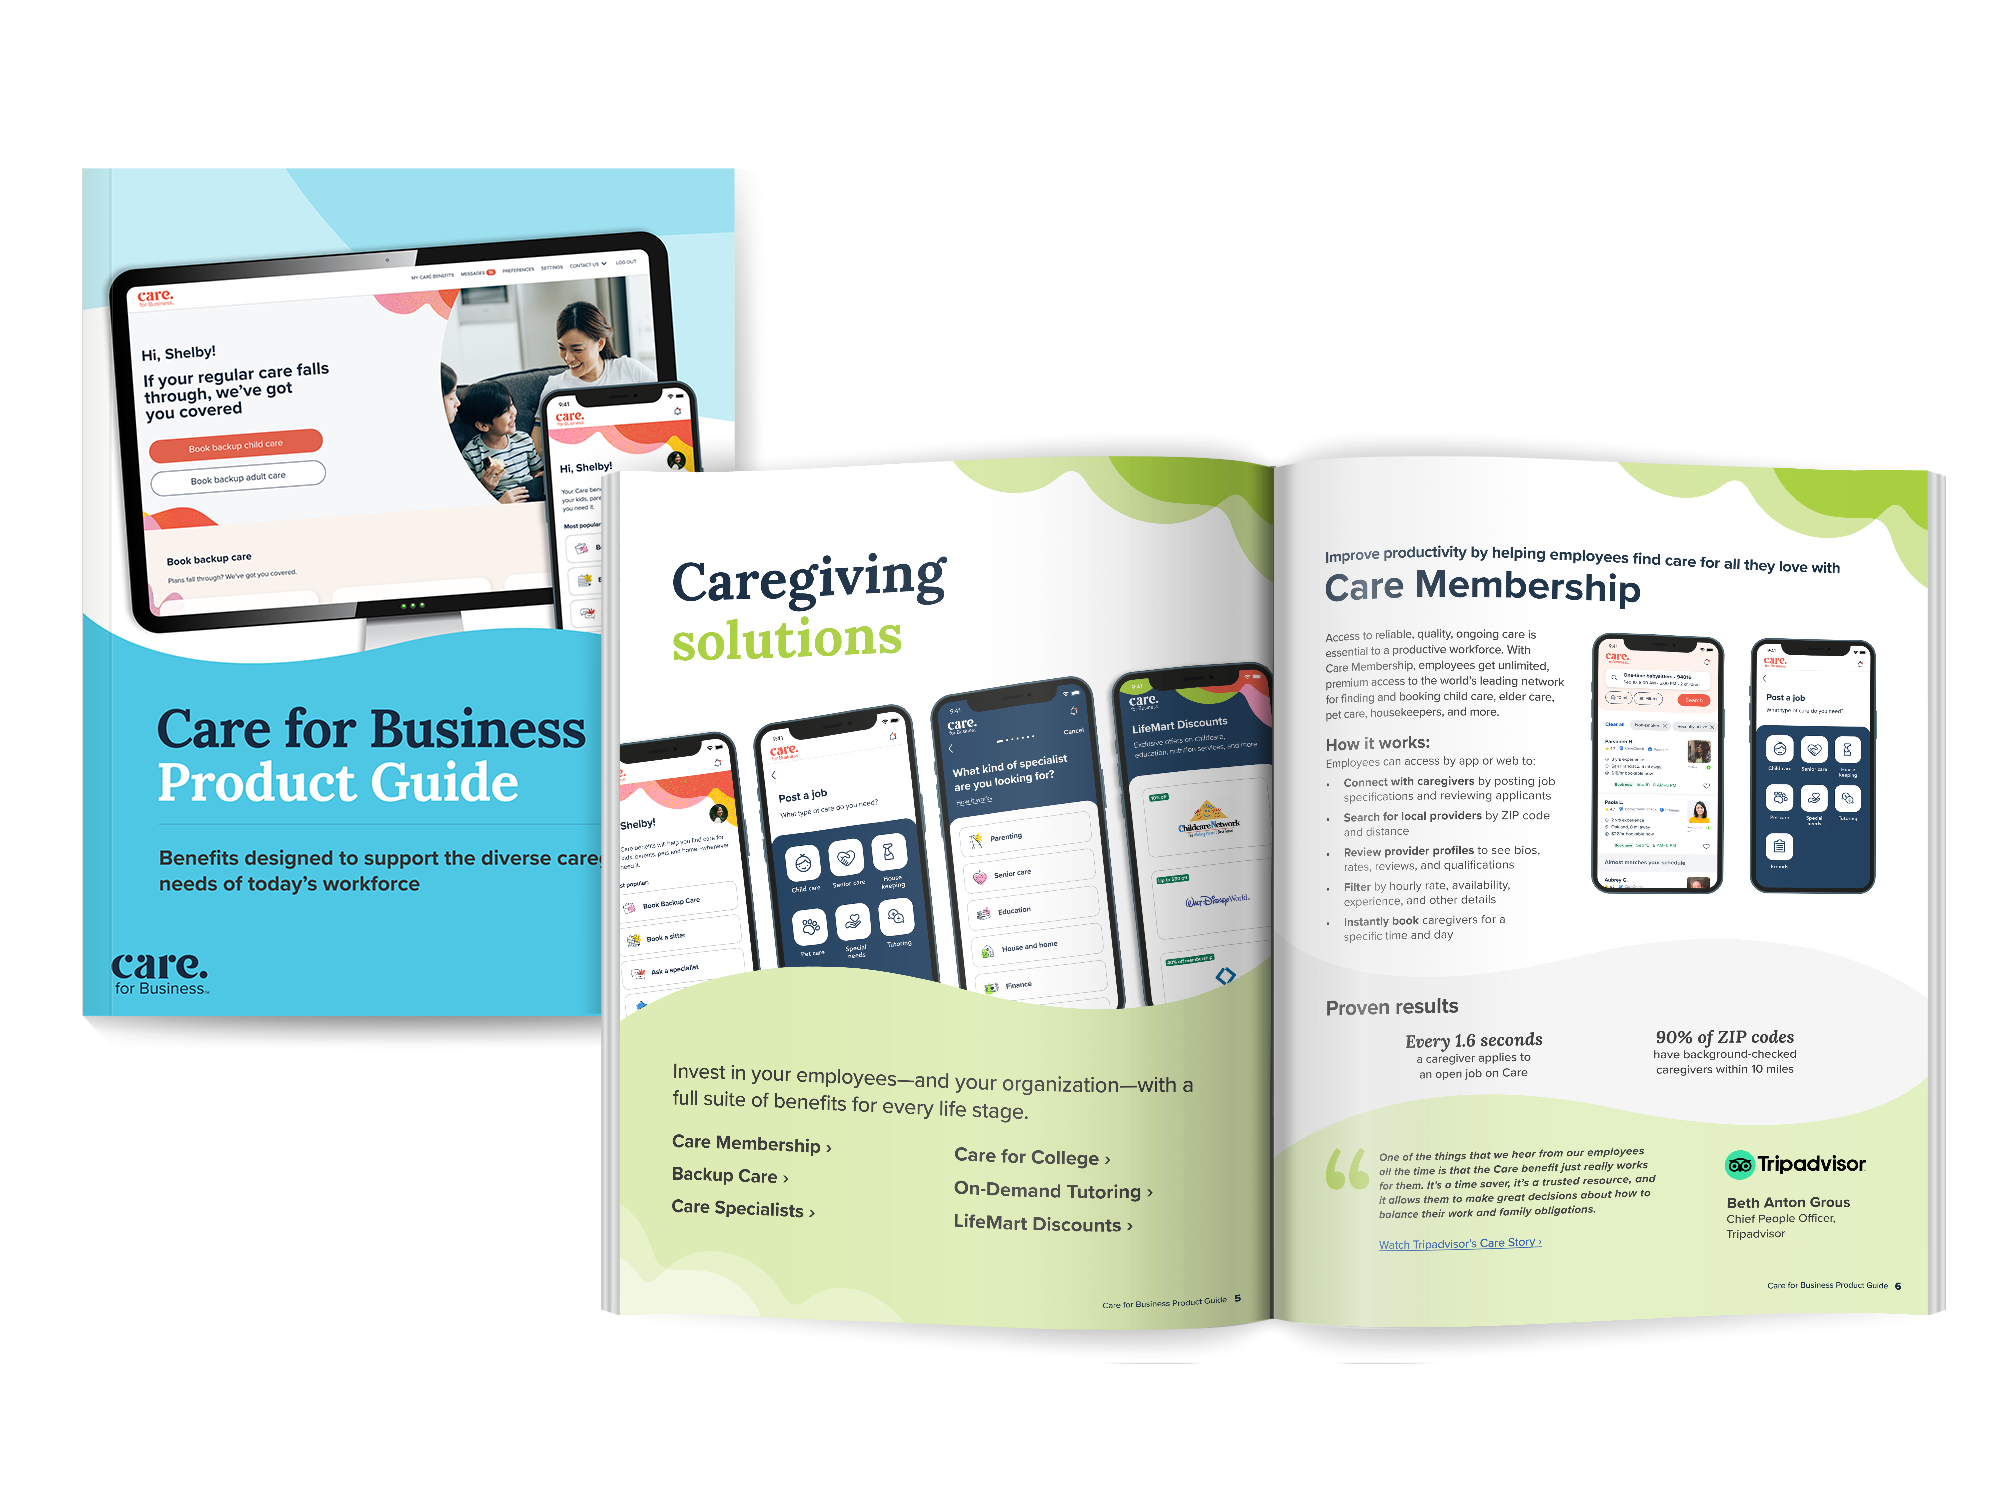 Care for Business Product Guide